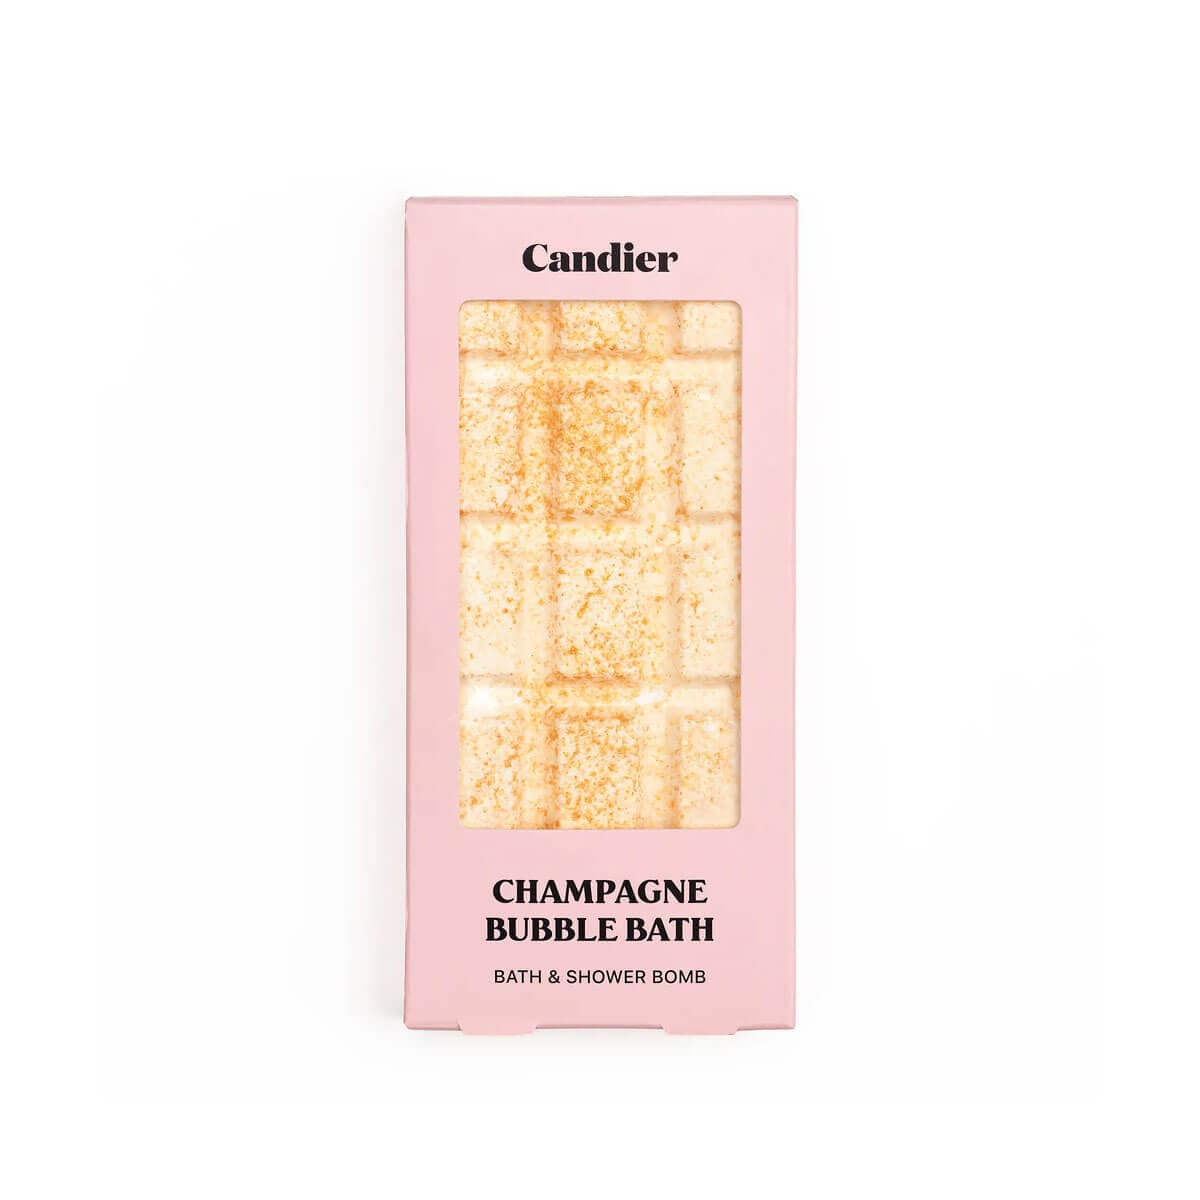 Champagne Bubble Bath Bar by Candier front | MILK MONEY milkmoney.co | natural skin care products. organic skin care. clean beauty products. organic skin care products. natural skincare. vegan skincare. organic skincare. organic beauty products. vegan cruelty free skincare. vegan skincare products